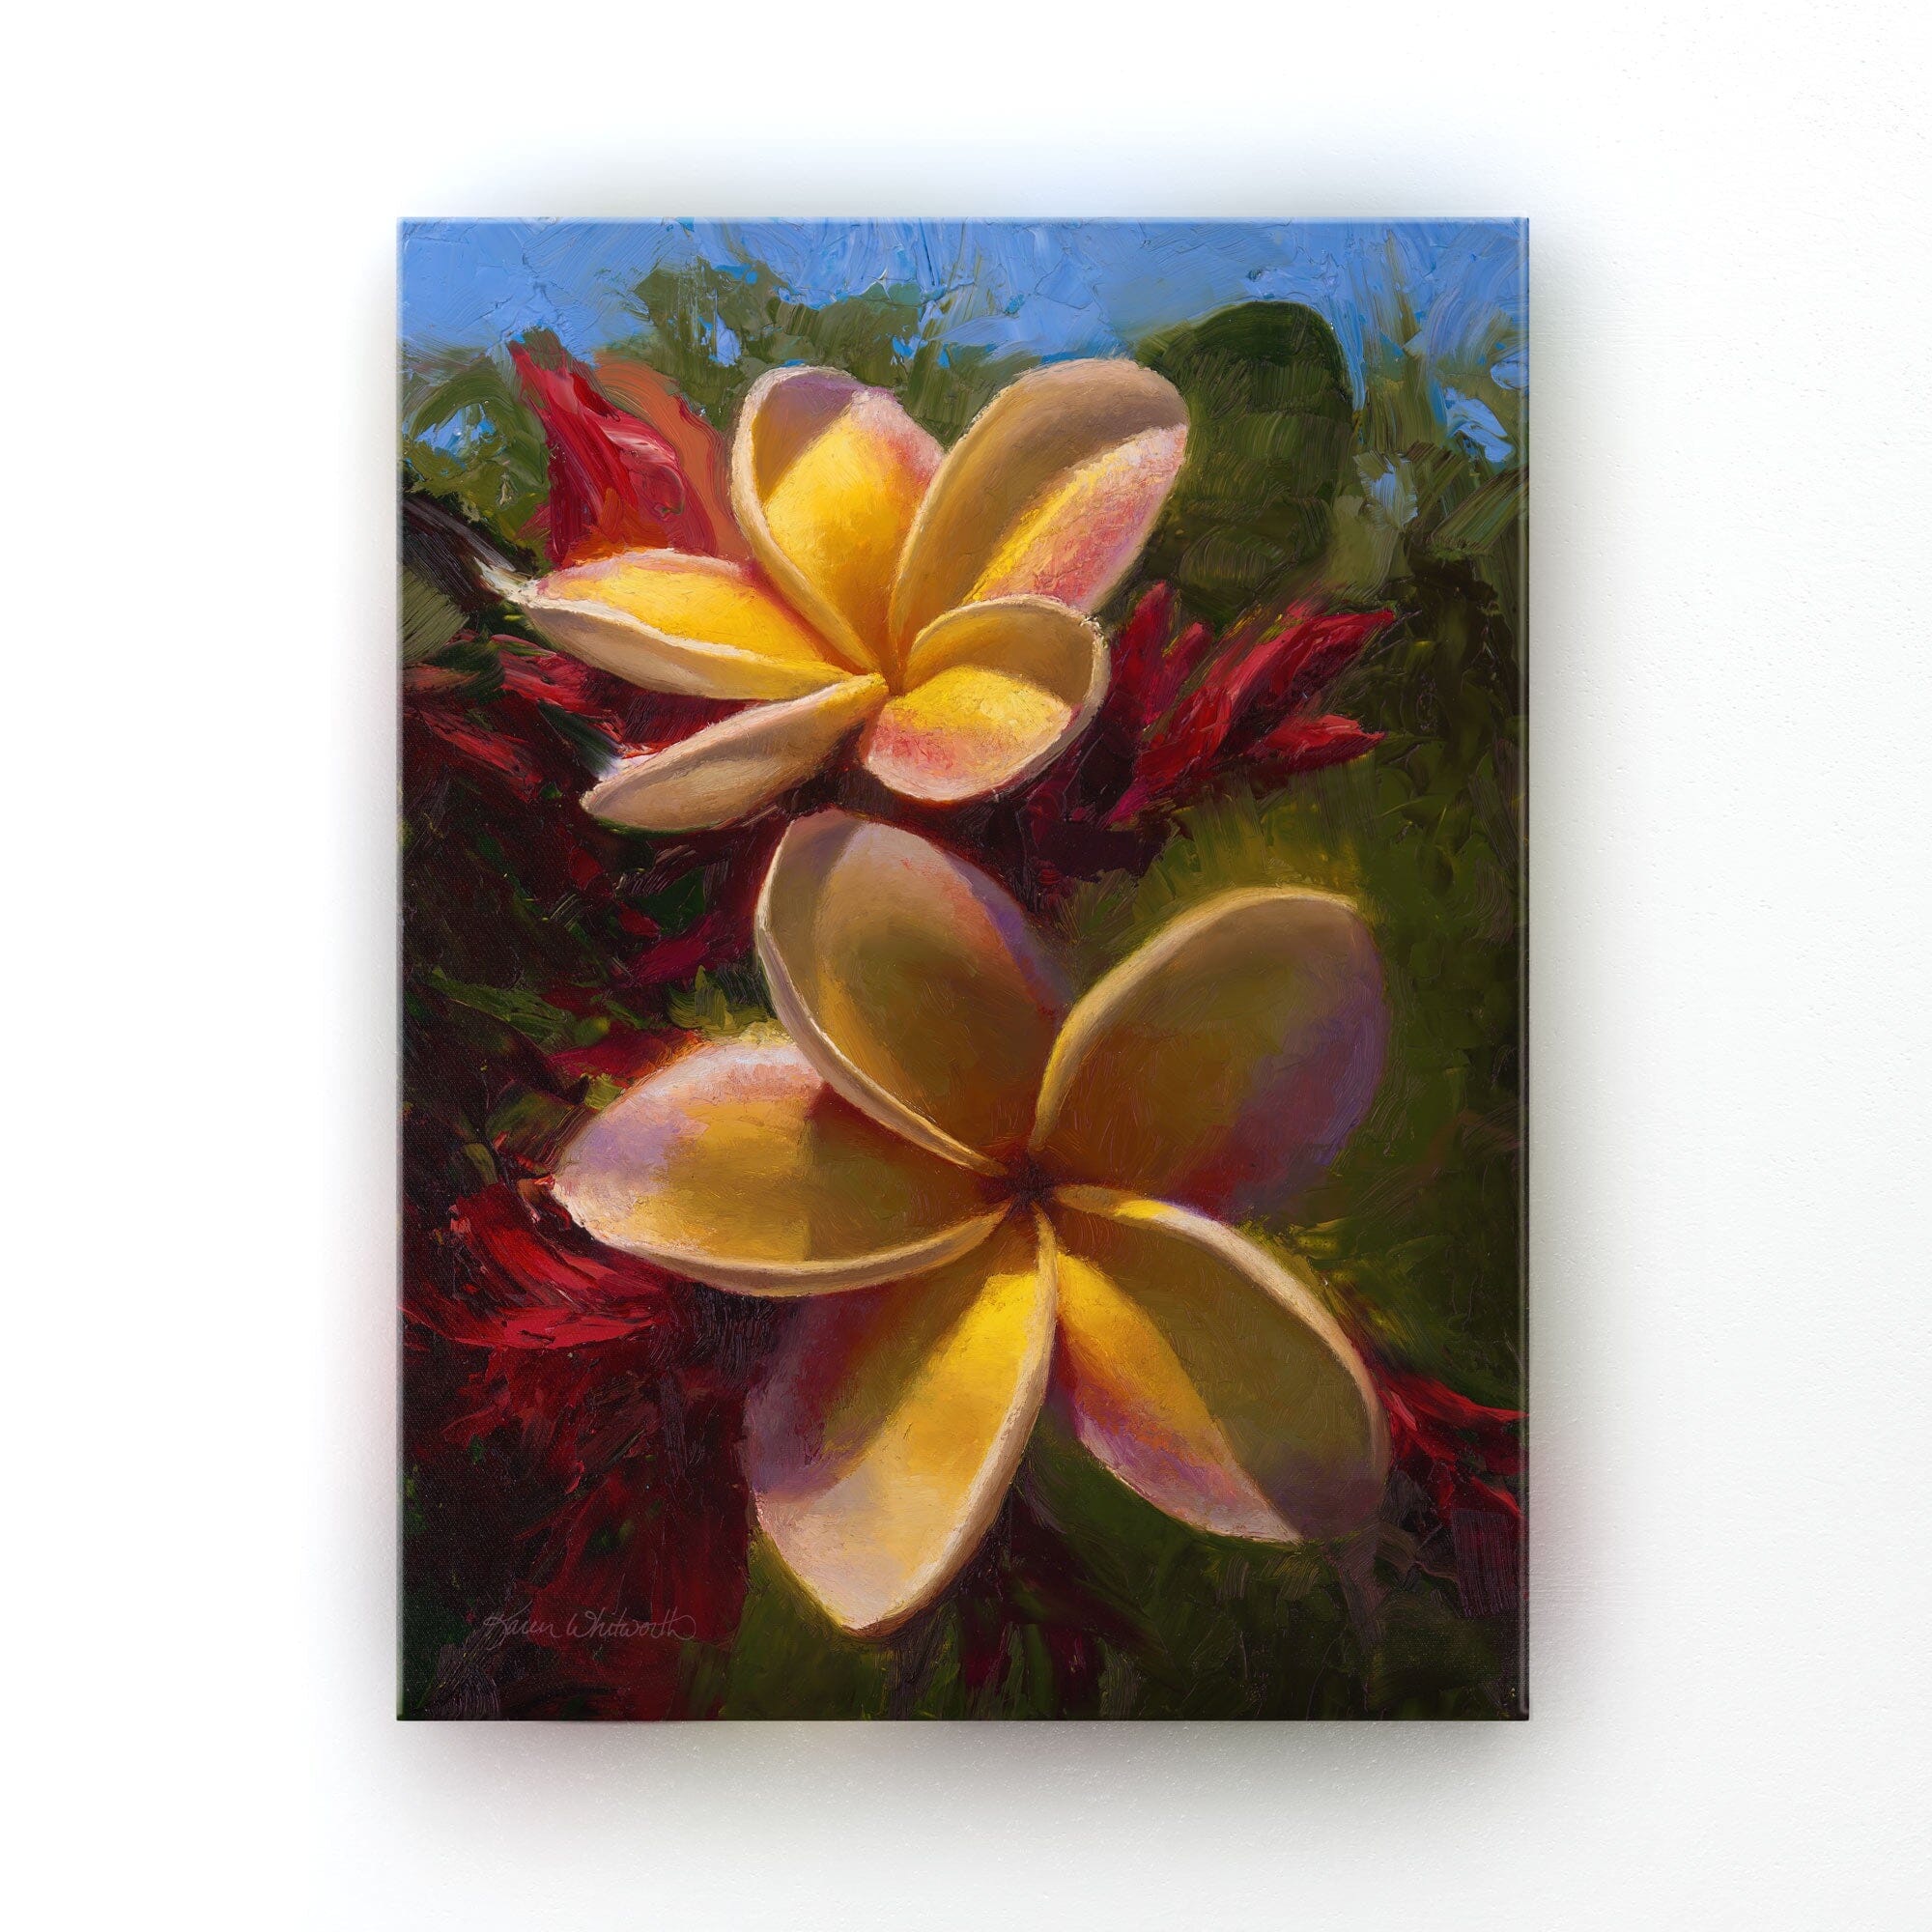 Hawaiian canvas art of tropical plumeria flowers in a floral painting by artist Karen Whitworth. The artwork is hanging on a white wall. 